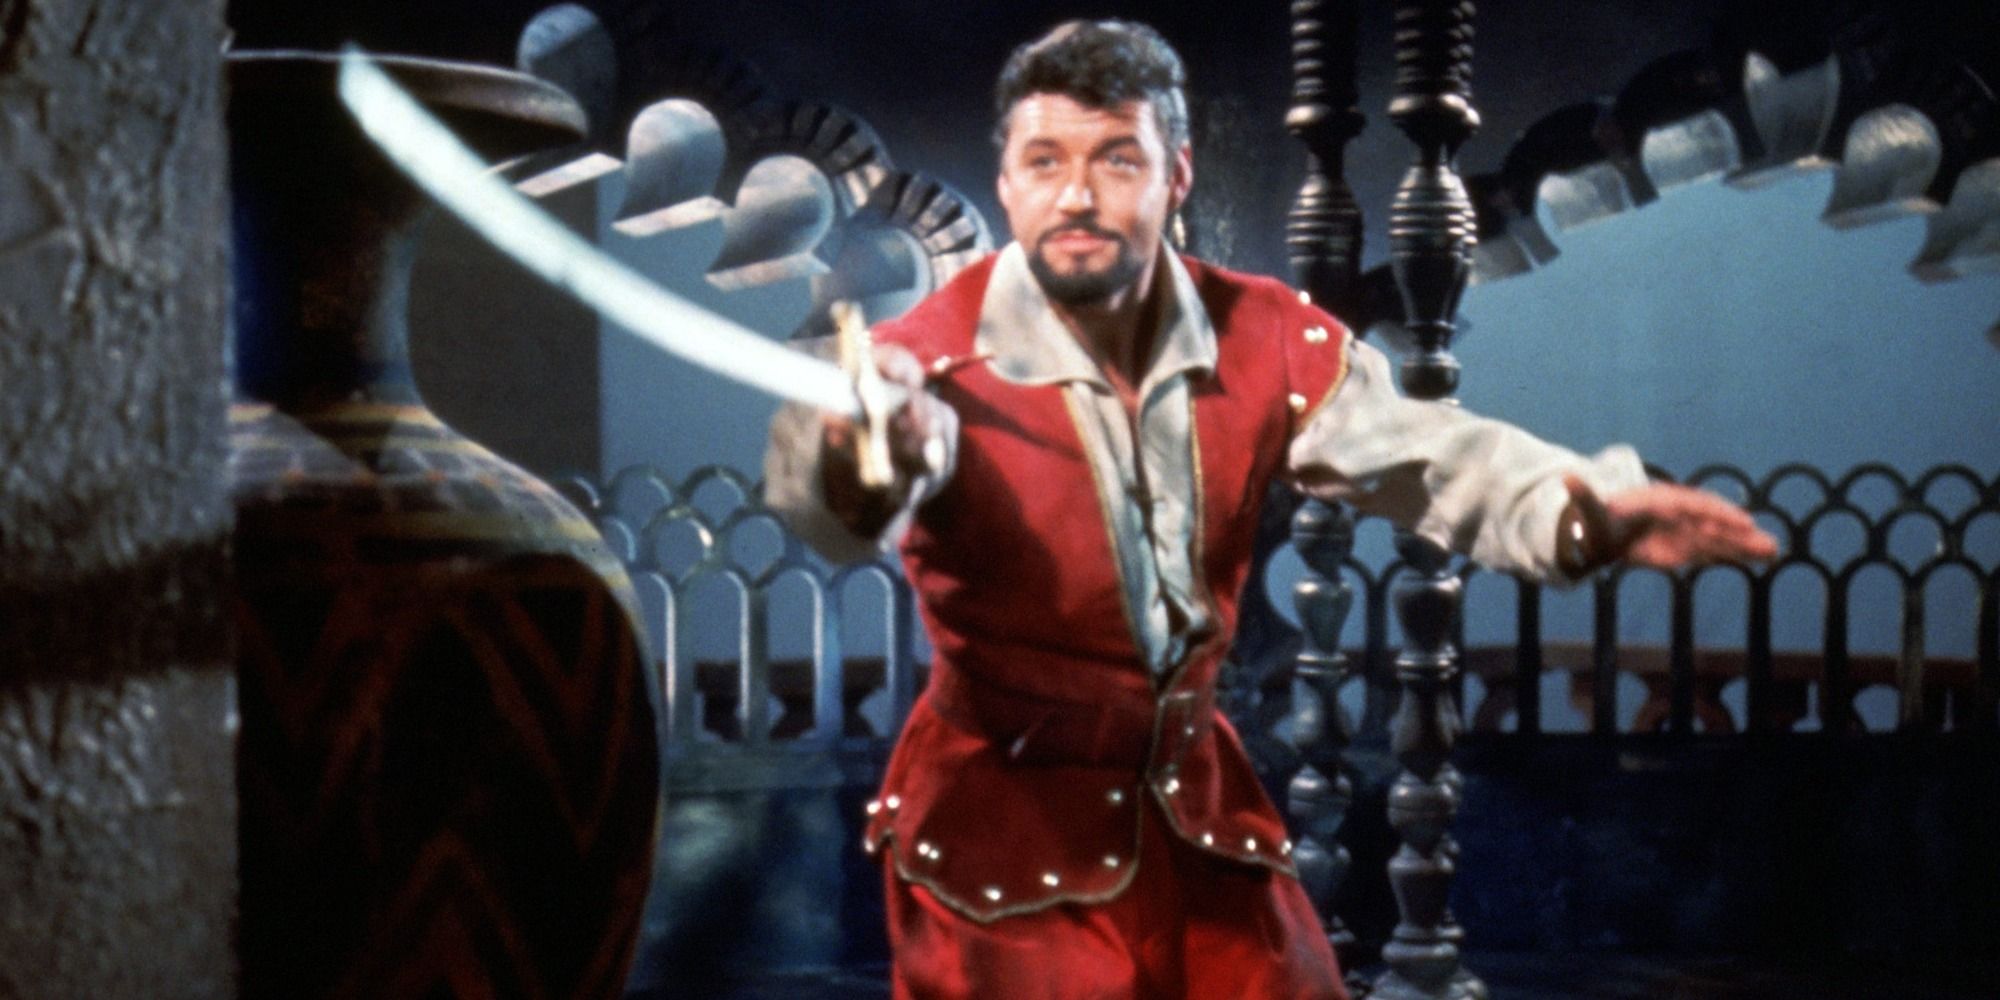 Guy Williams as Sinbad holding a sword in Captain Sinbad (1963)